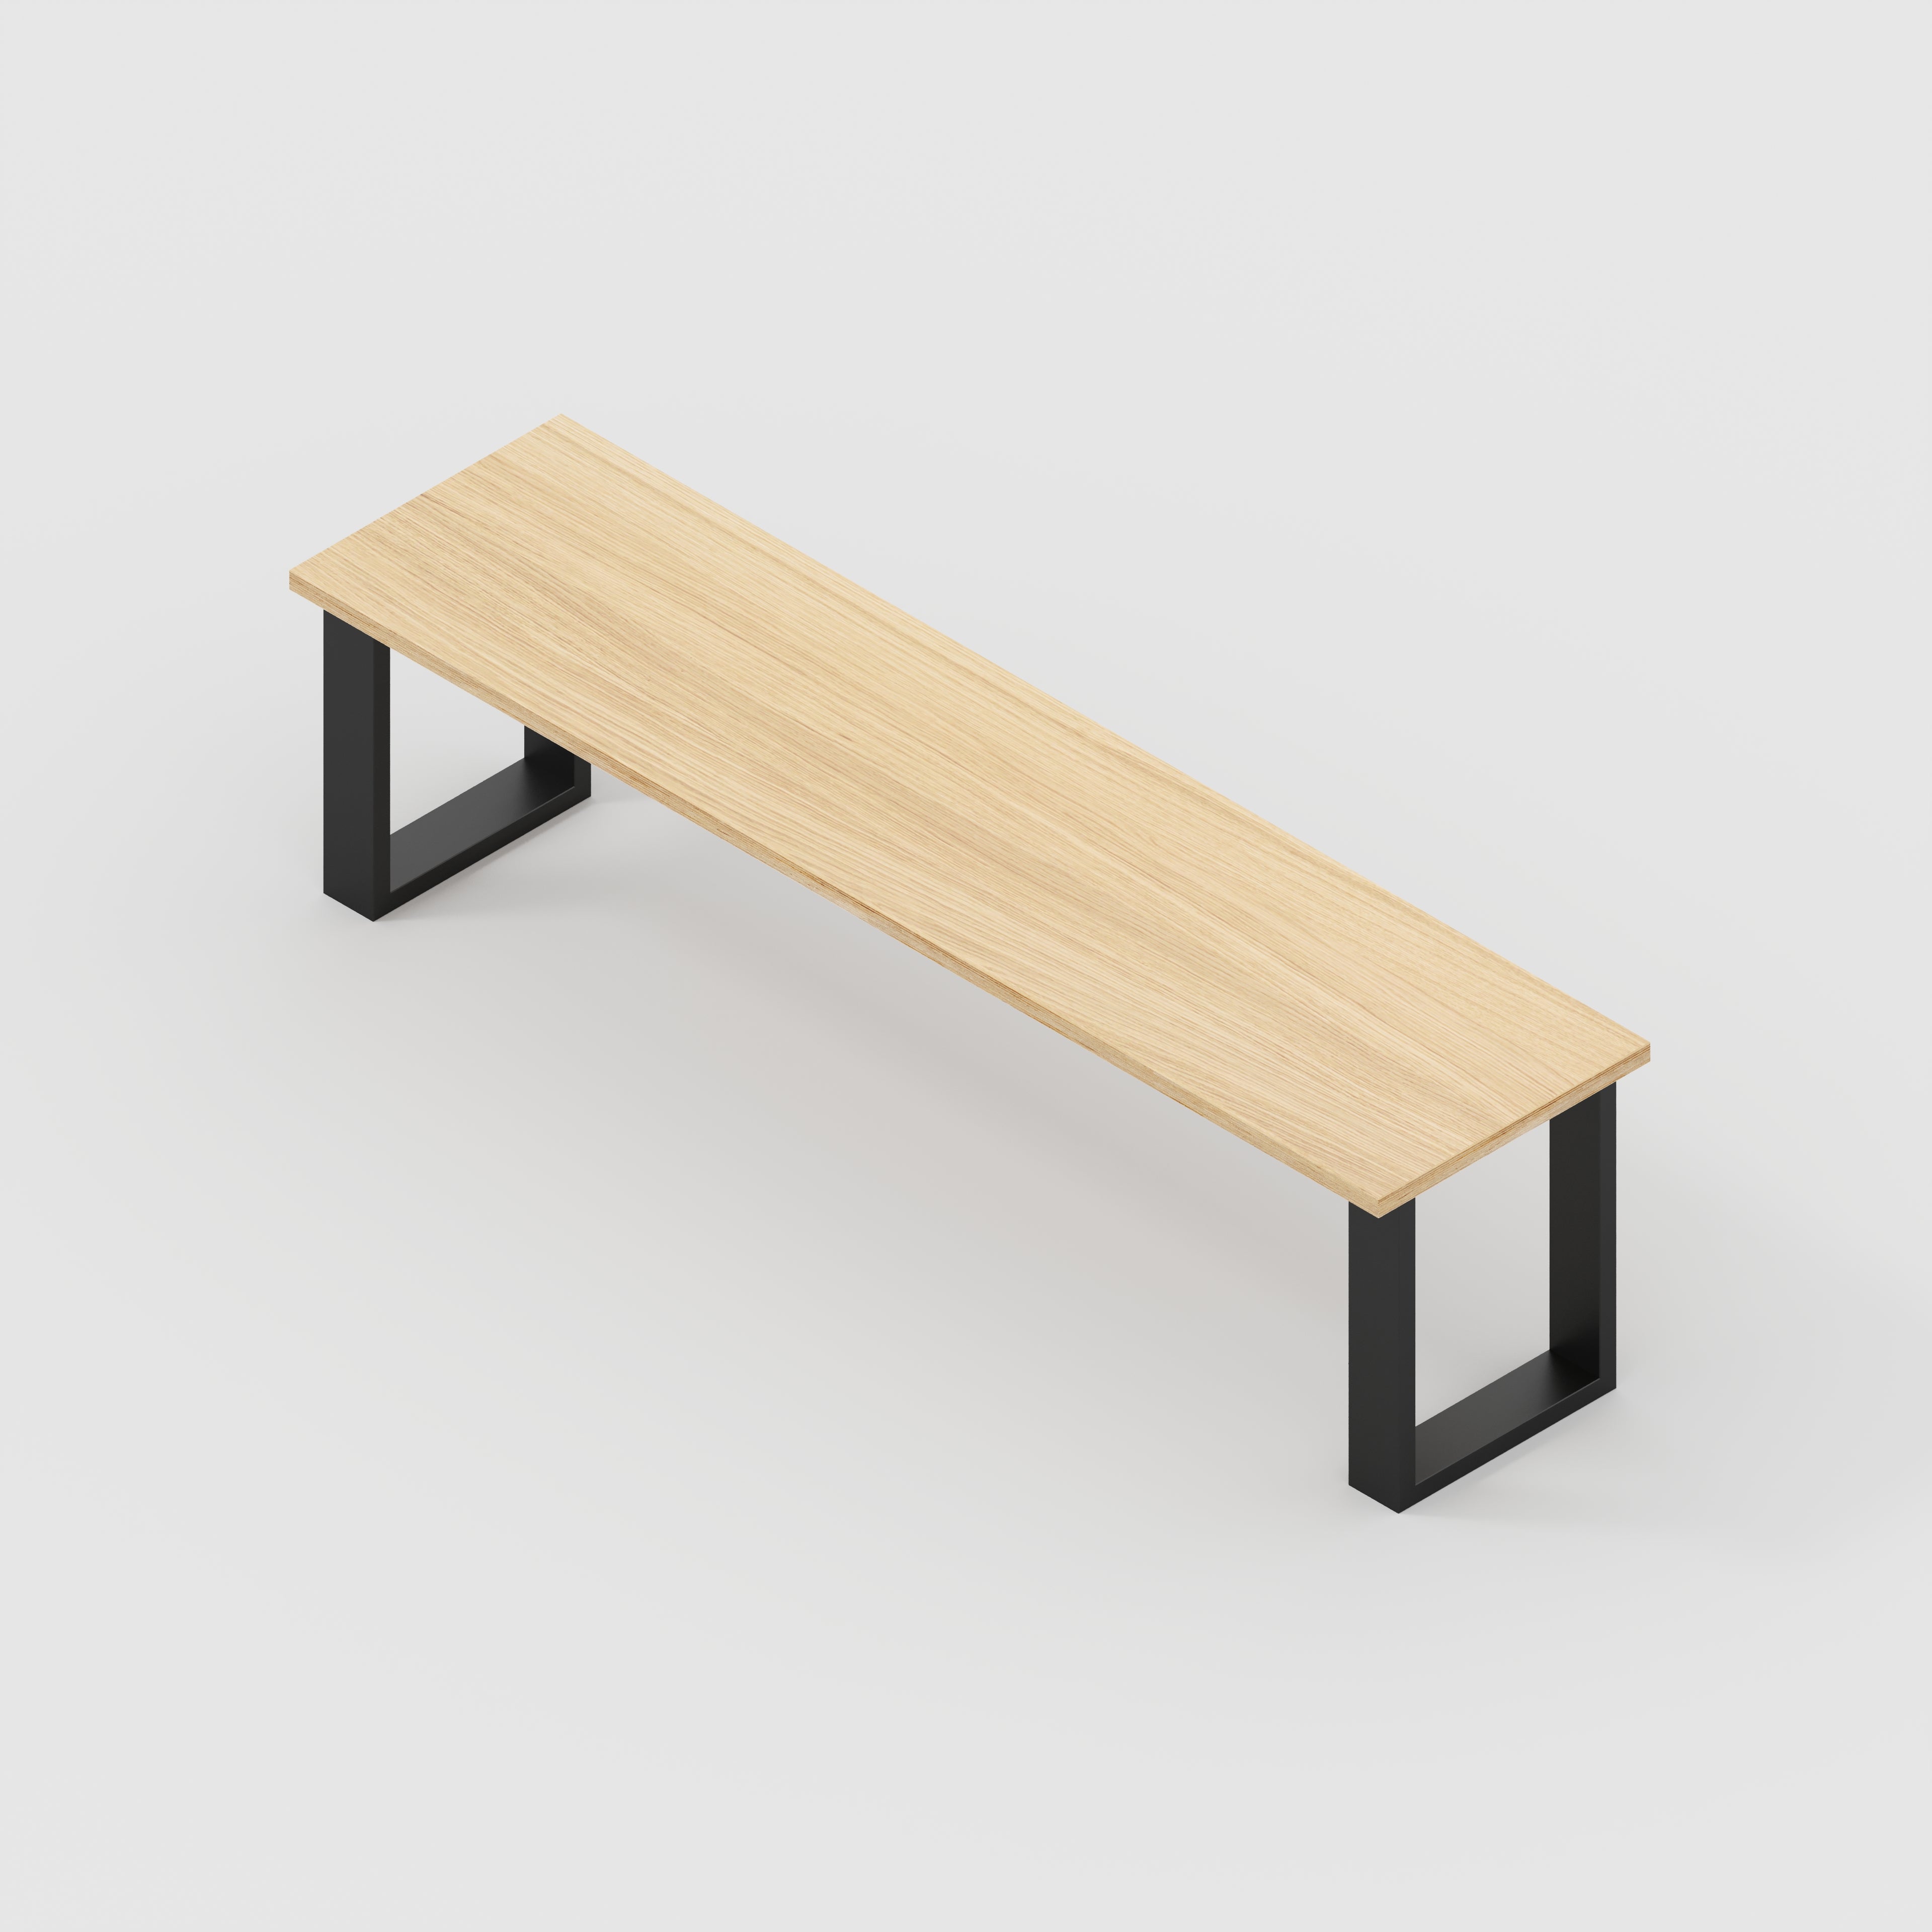 Bench Seat with Black Industrial Legs - Plywood Oak - 1600(w) x 400(d)